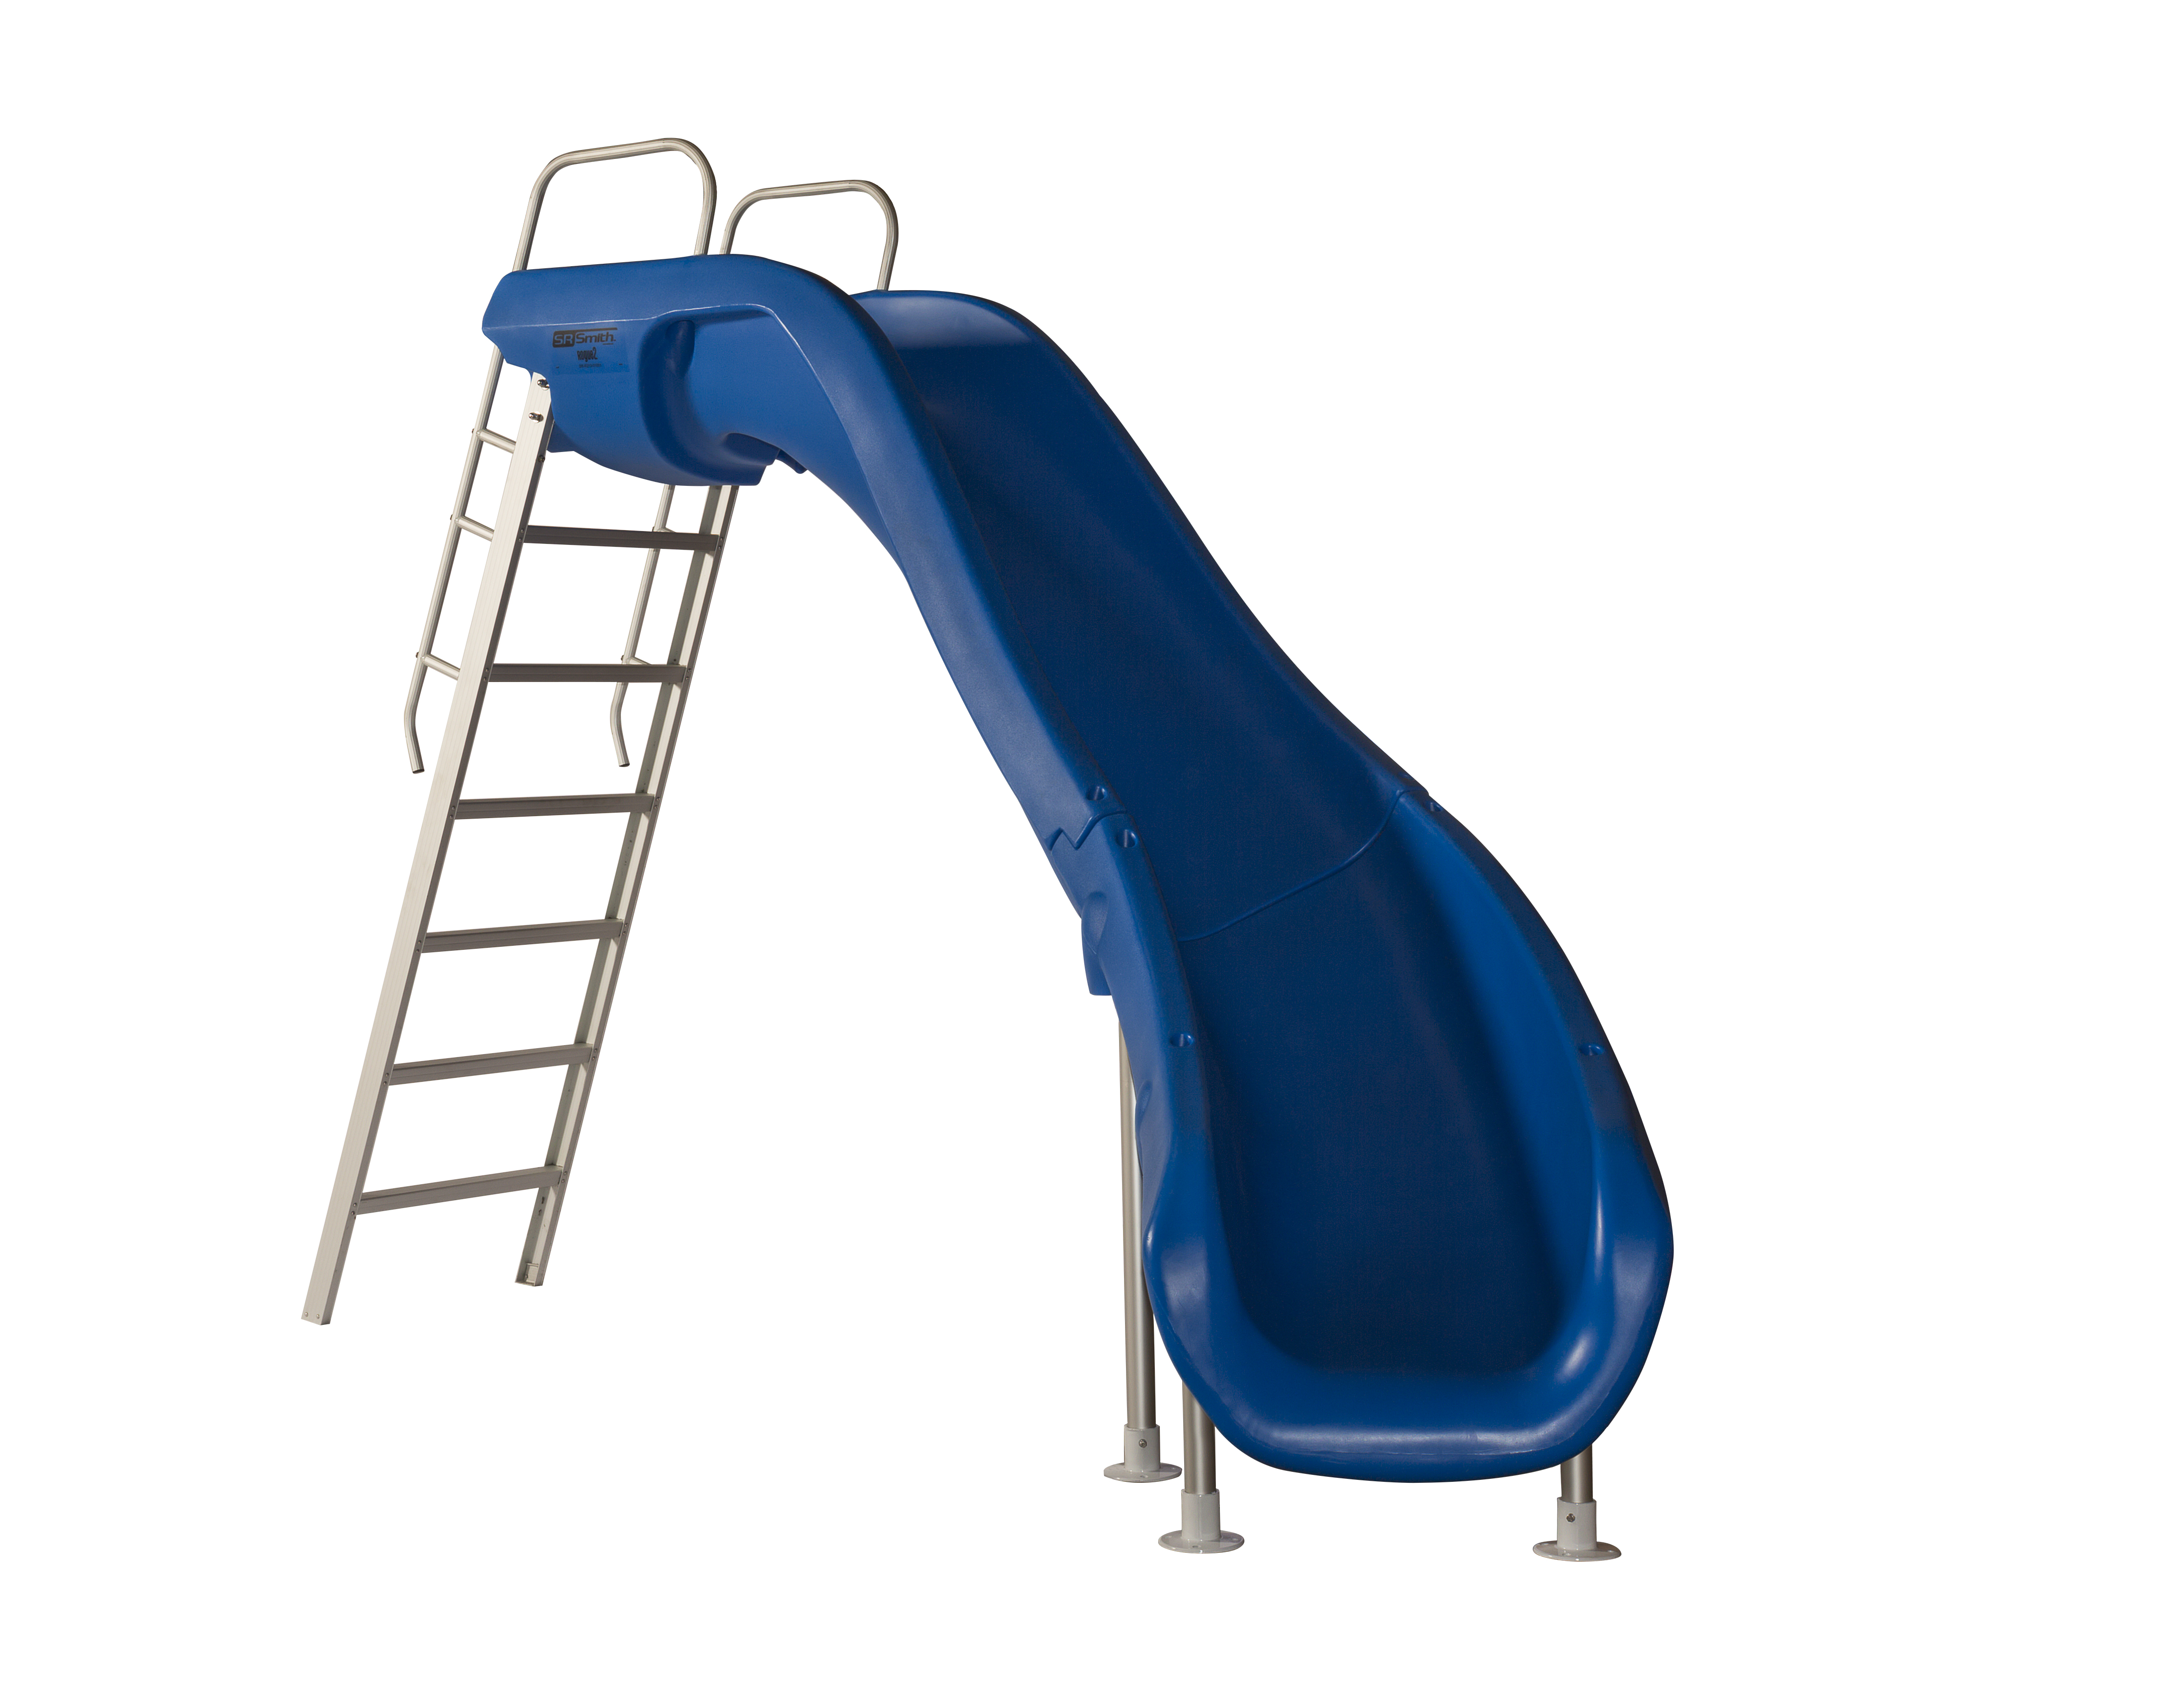 Rogue2 Pool Slide - Official S.R. Smith Products